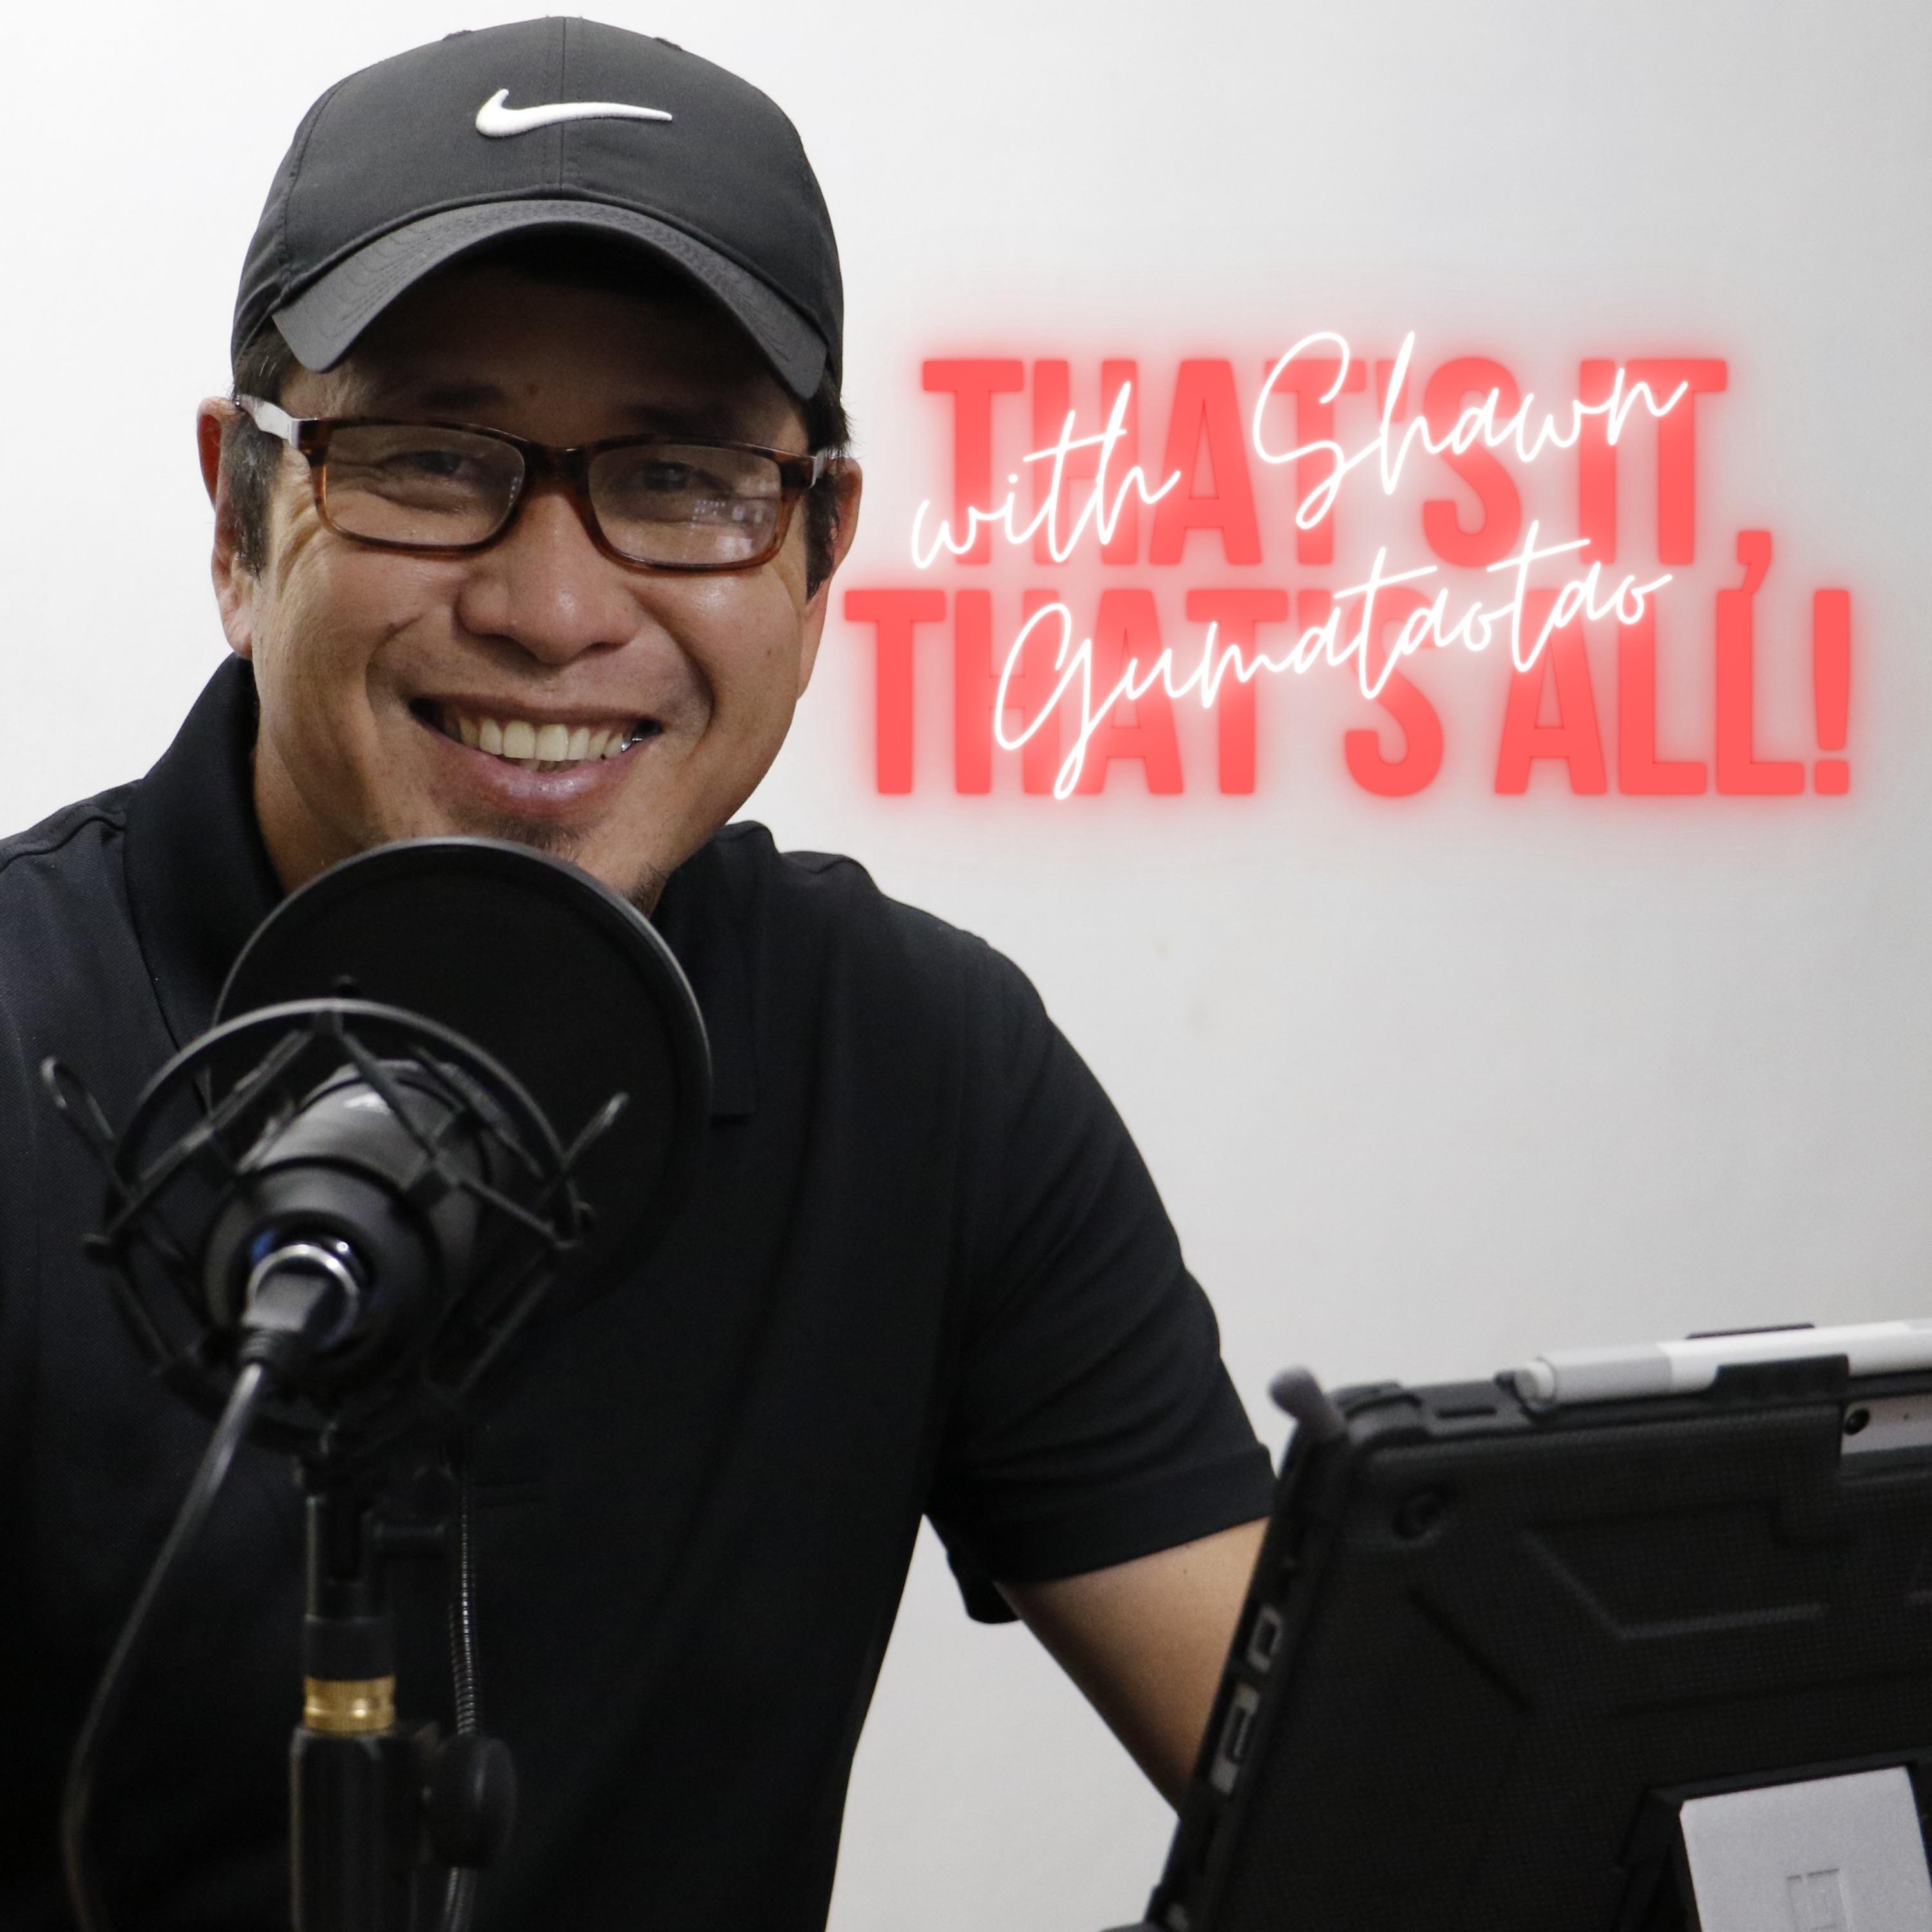 "That's It, That's All!" with Shawn Gumataotao